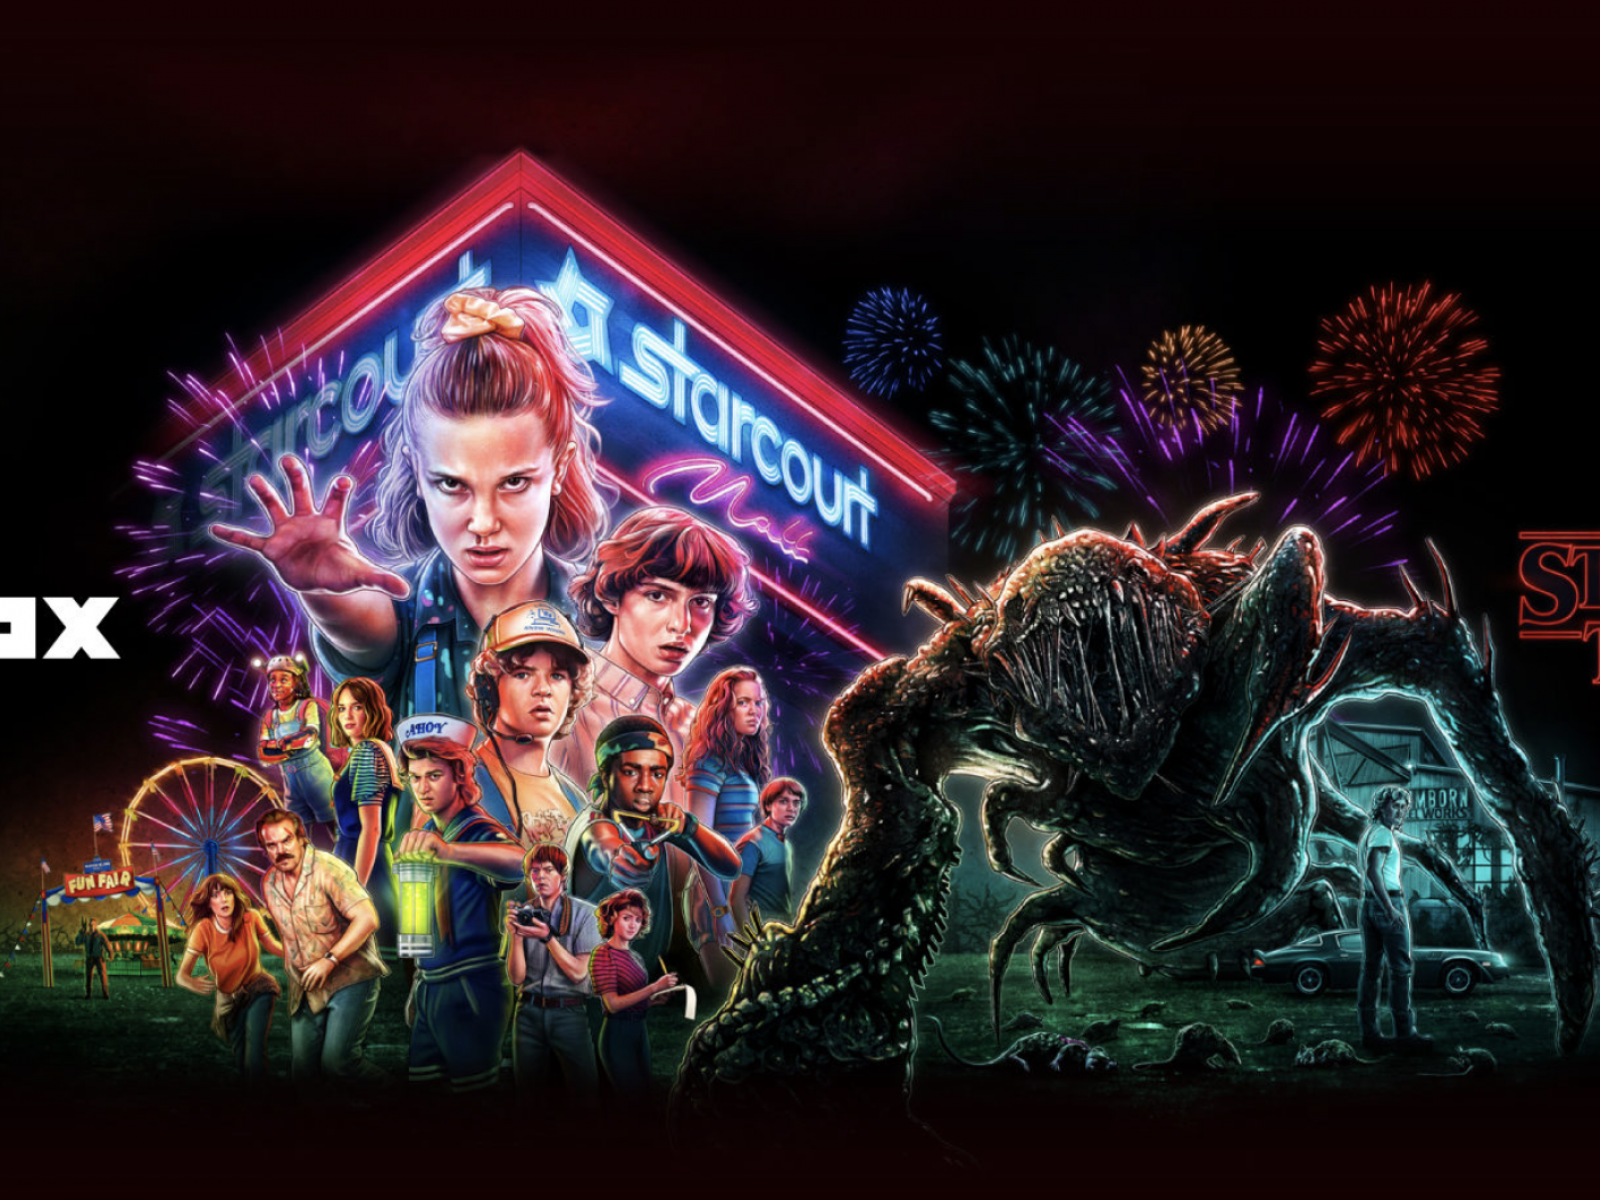 Roblox Stranger Things Event Promo Codes Get Rats Mall Outfit Bike Cap And More